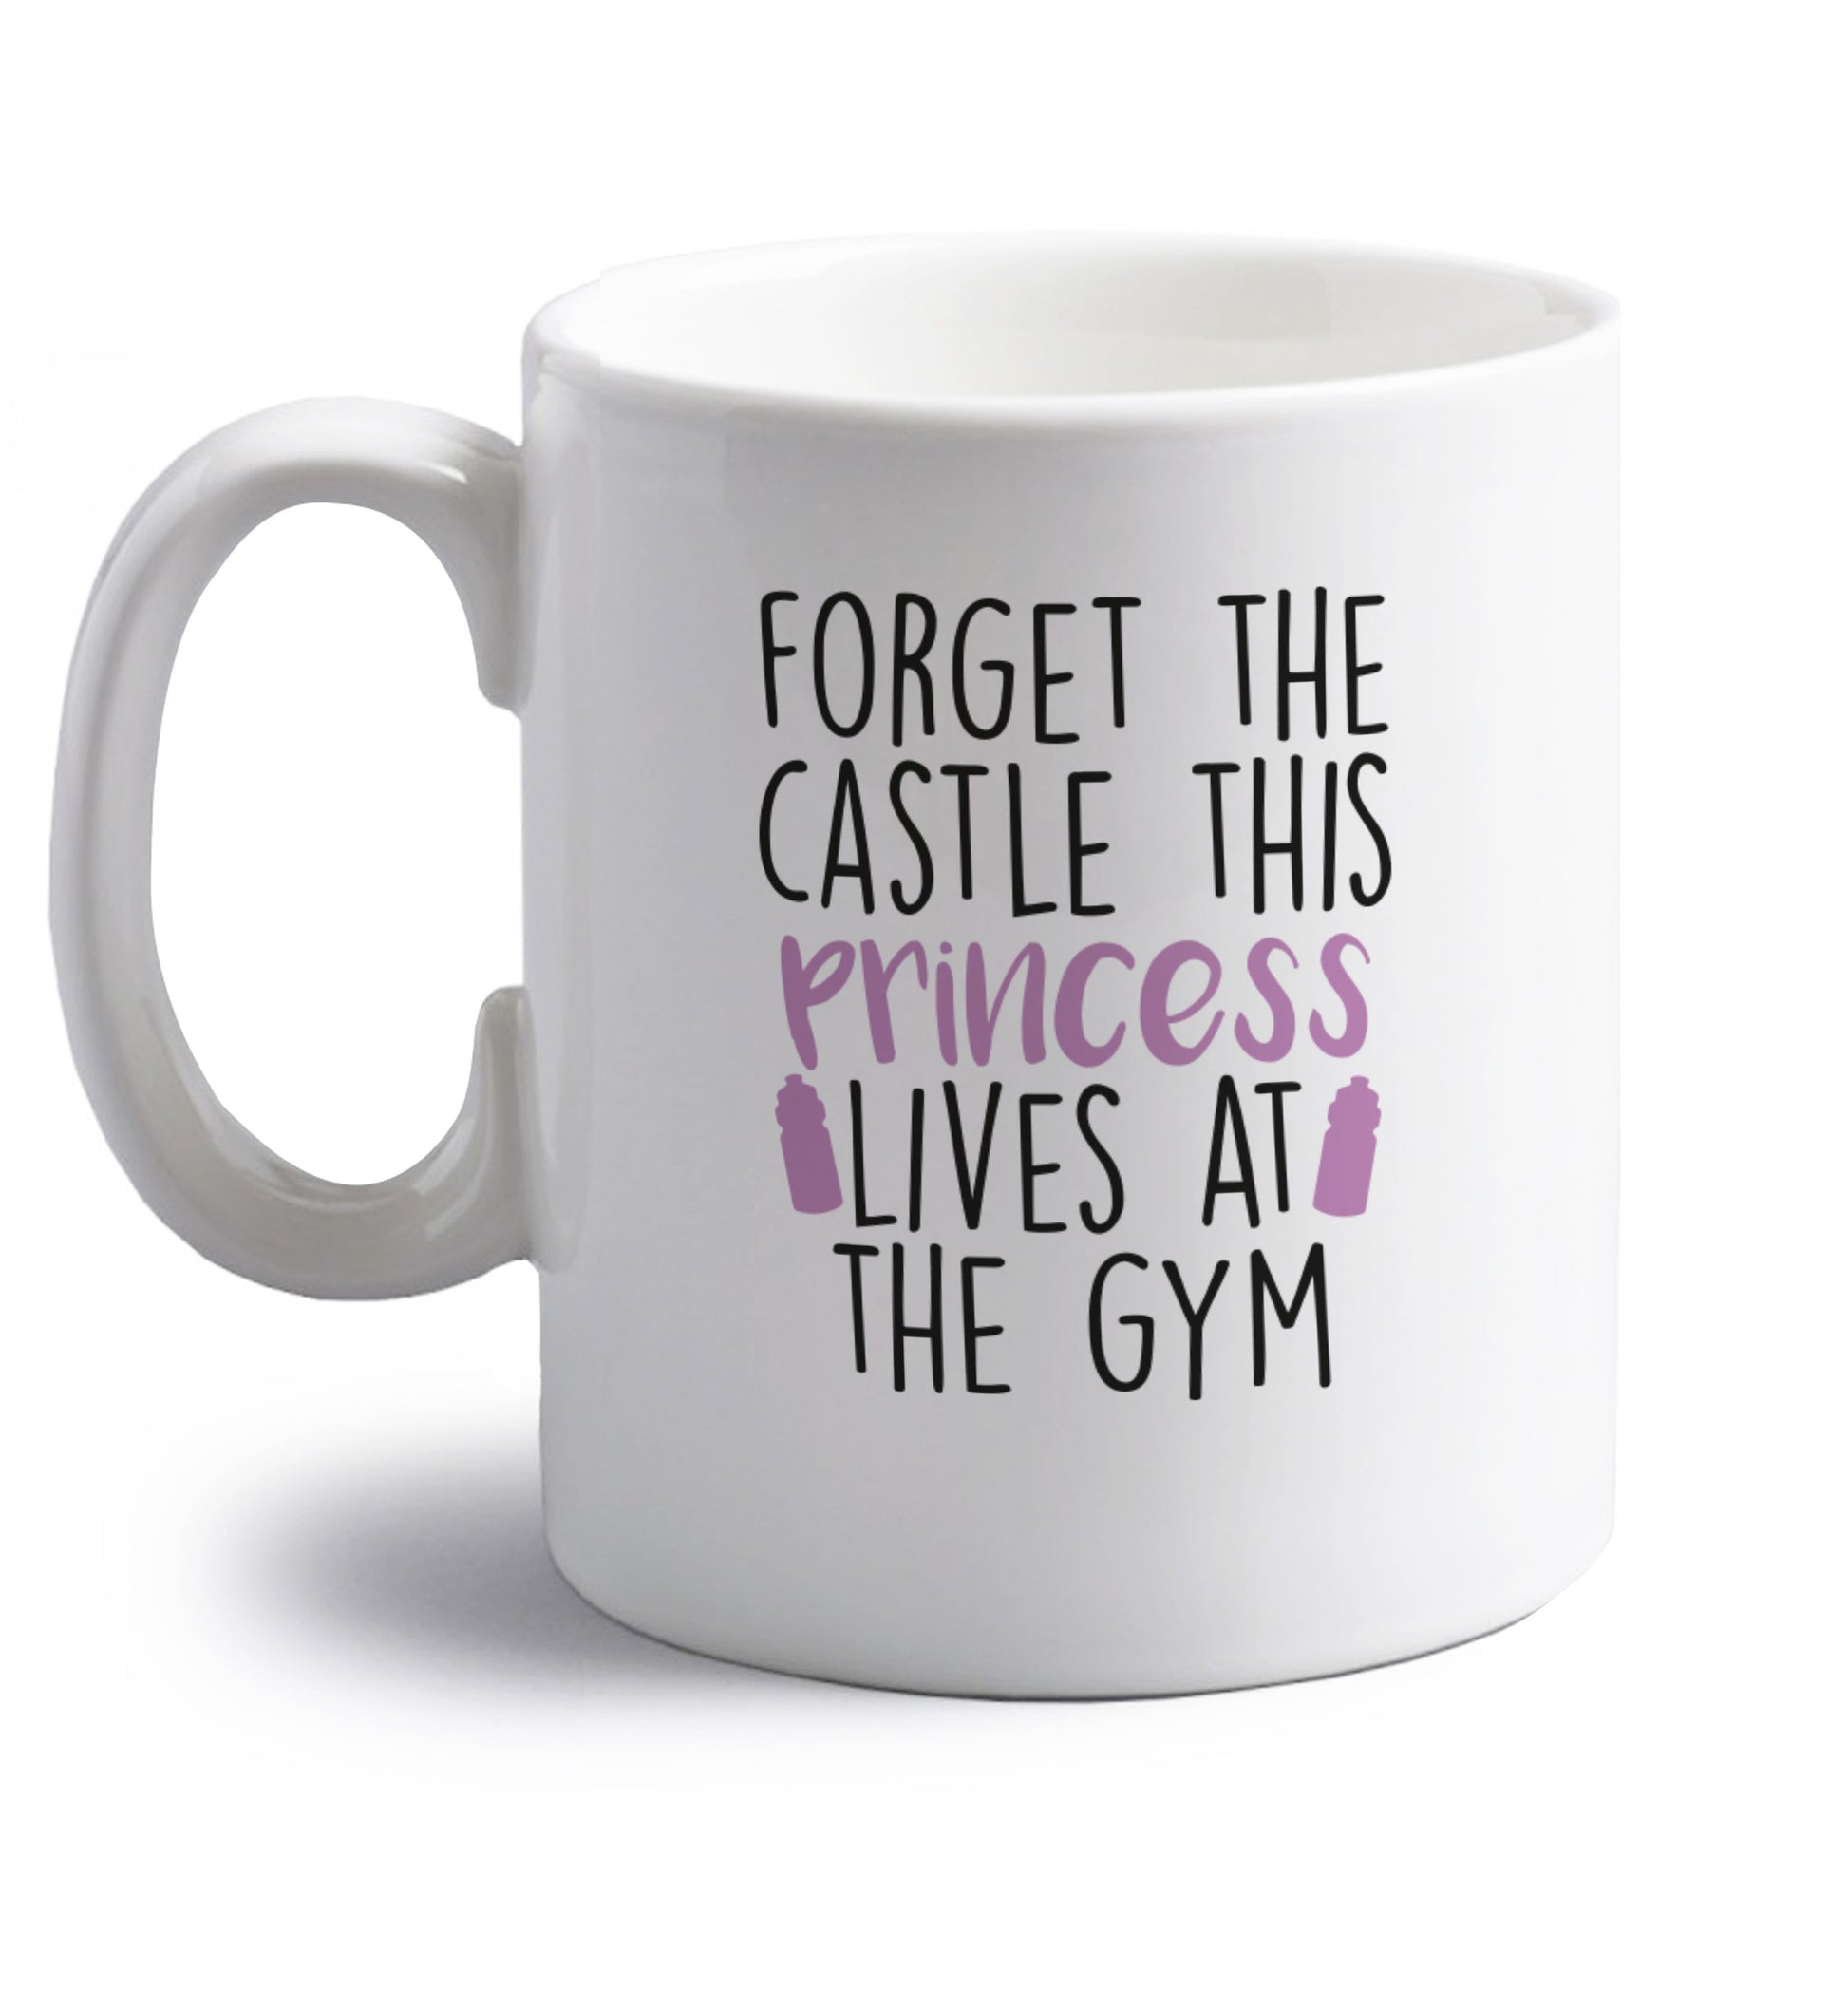 Forget the castle this princess lives at the gym right handed white ceramic mug 